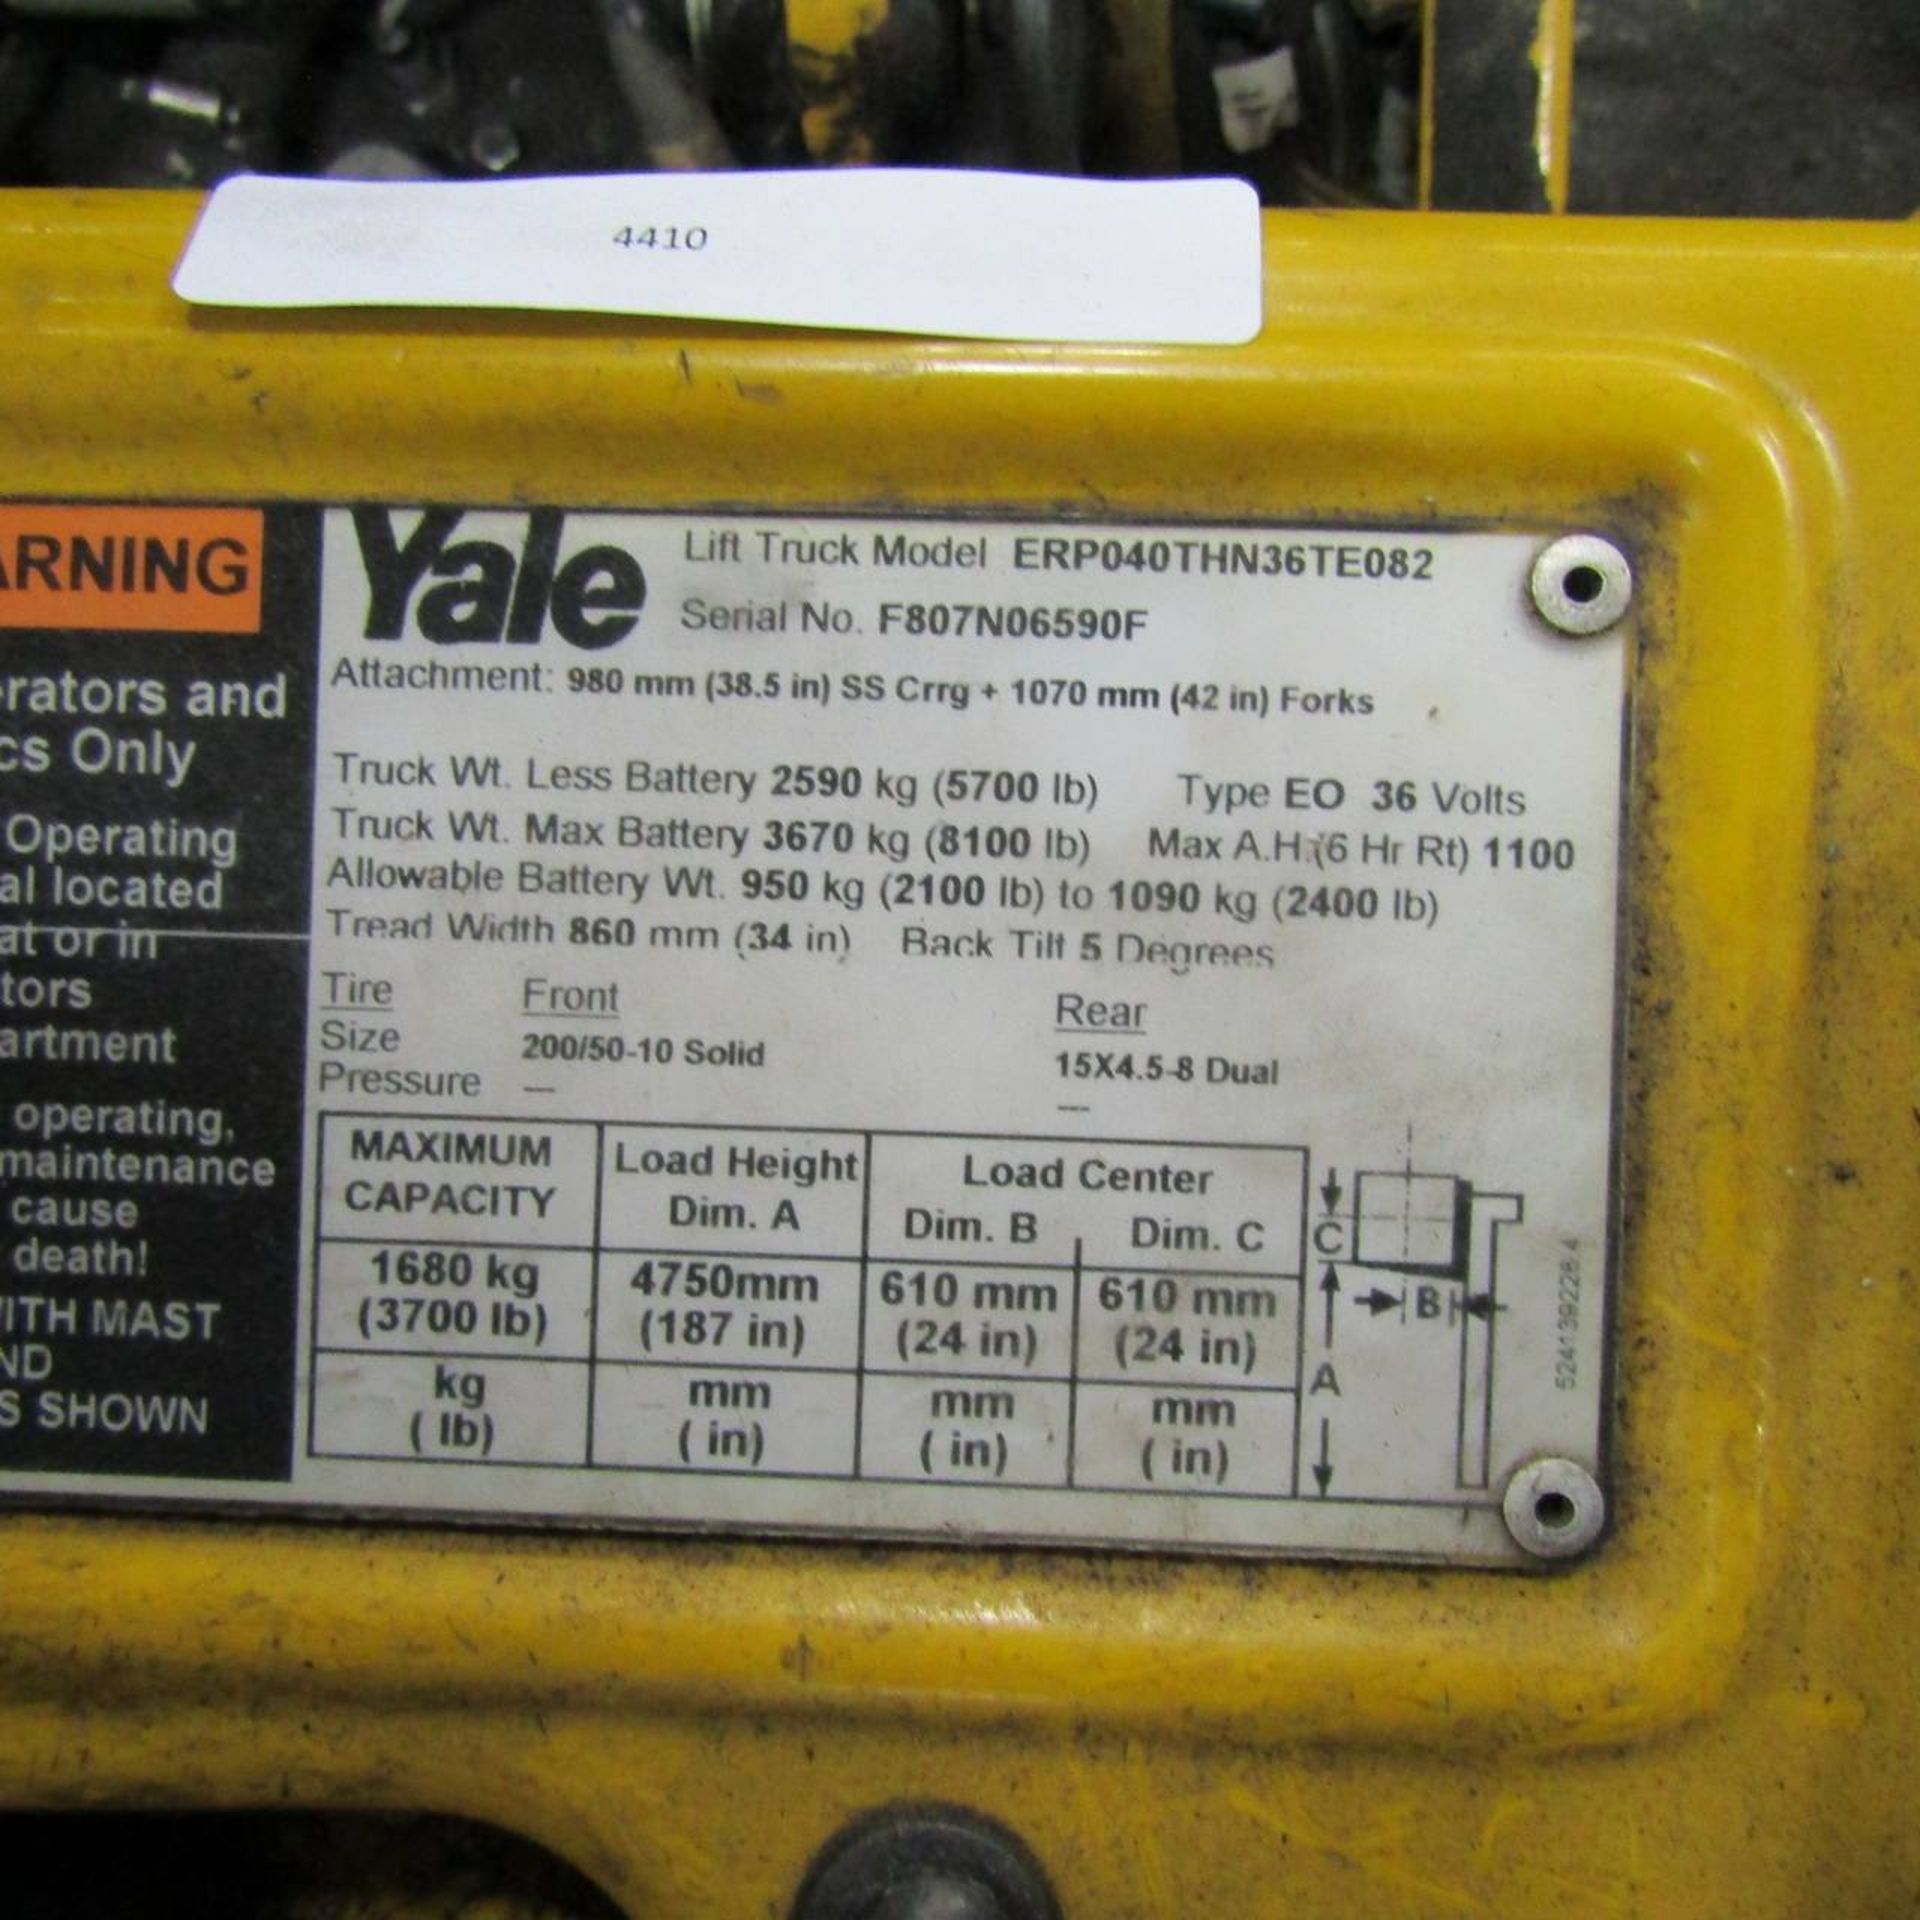 2008 Yale ERP040THN36TE082 Electric Fork Lift - Image 5 of 6